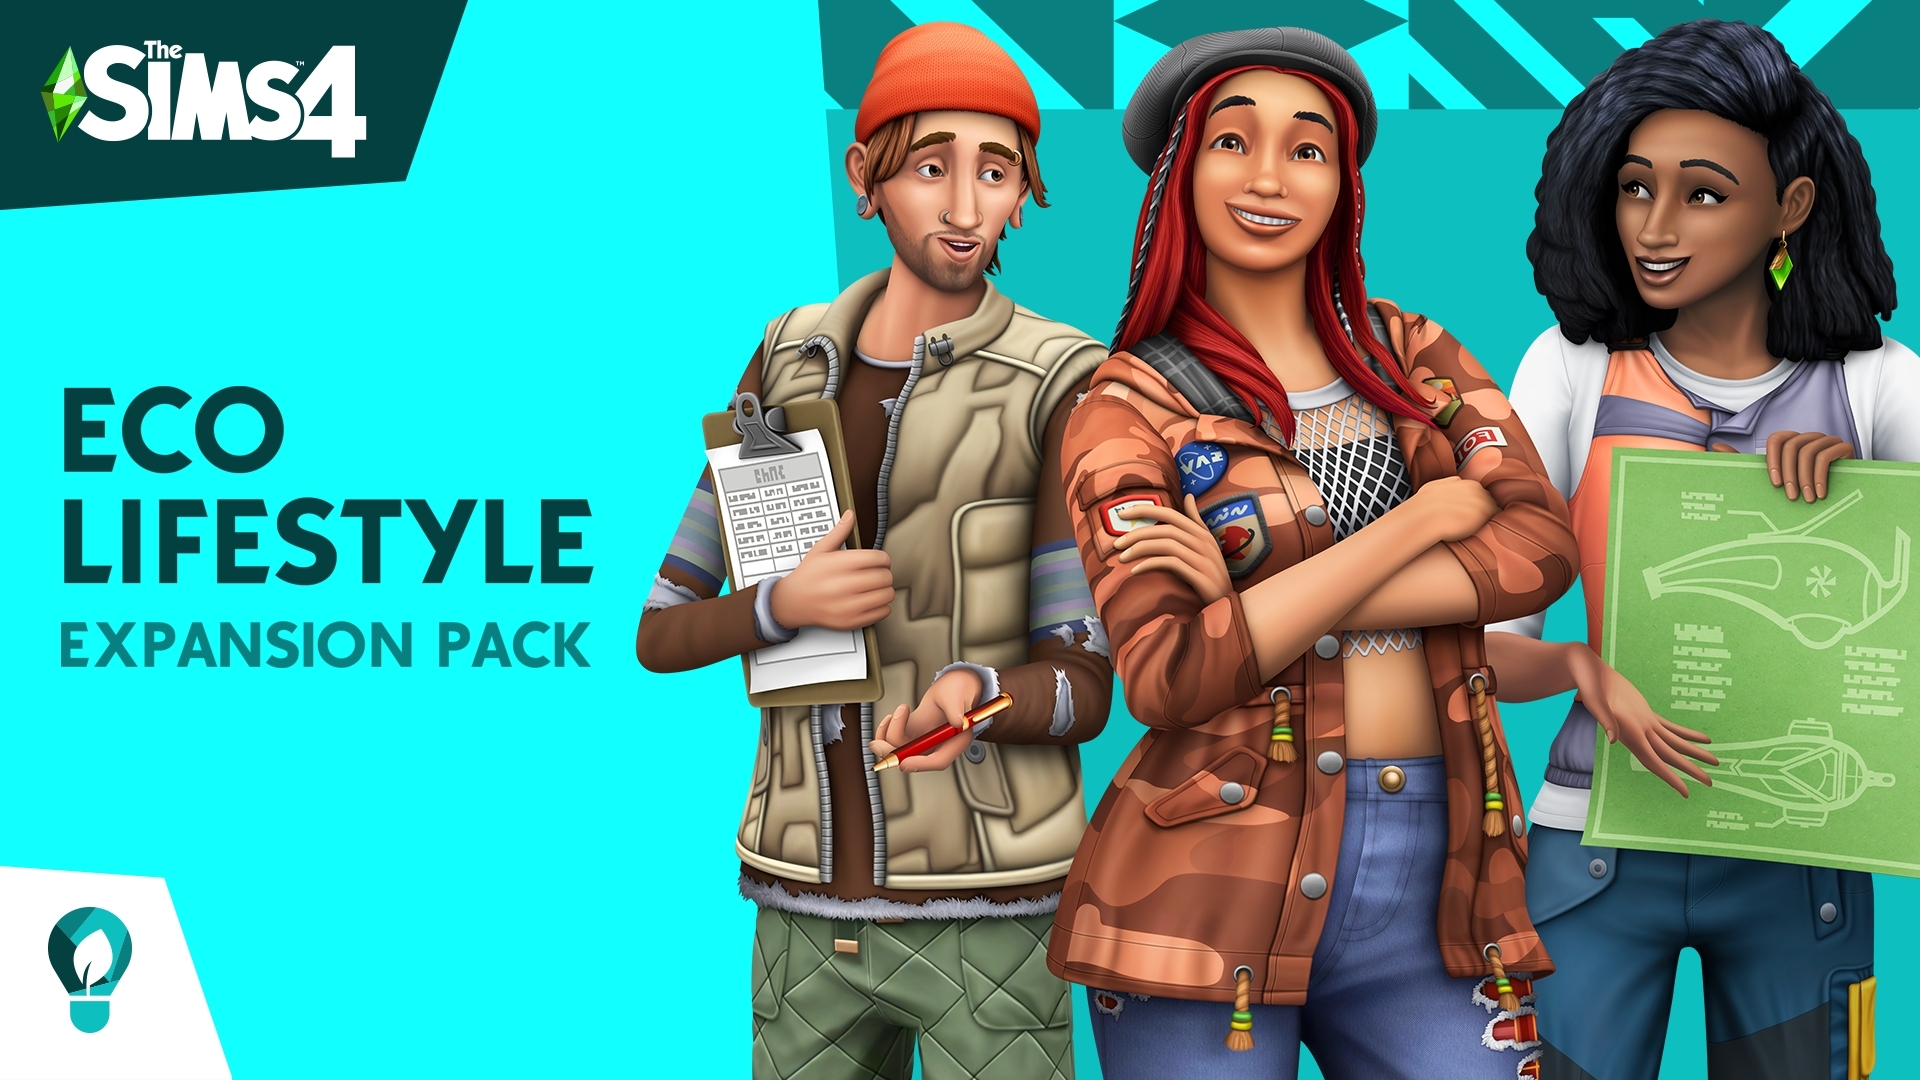 The Sims 4 Eco Lifestyle Launches Today on PC, Mac, and Consoles